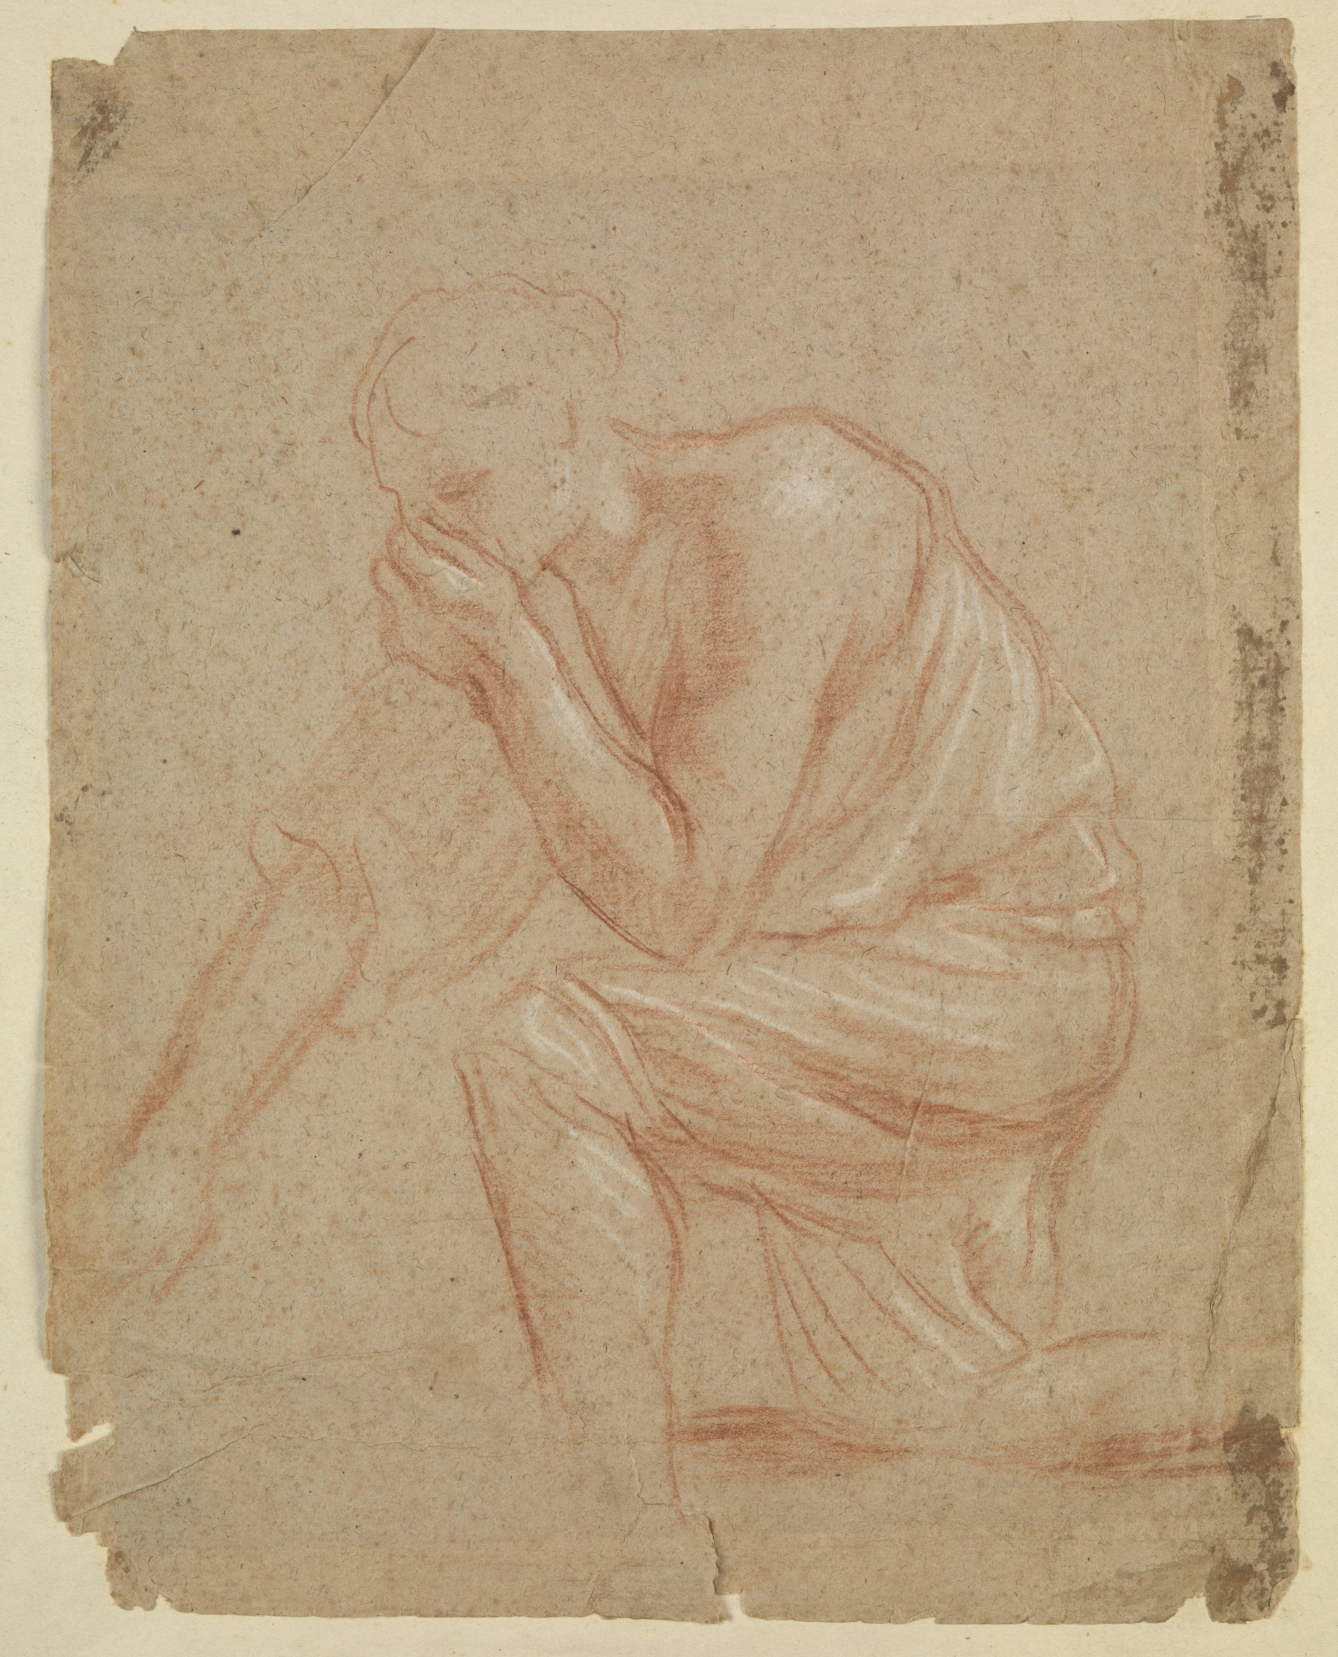 A faint sketch, in red and white pencil, of a man dressed in a robe kneeling on his right knee, with his left hand held to his nose.